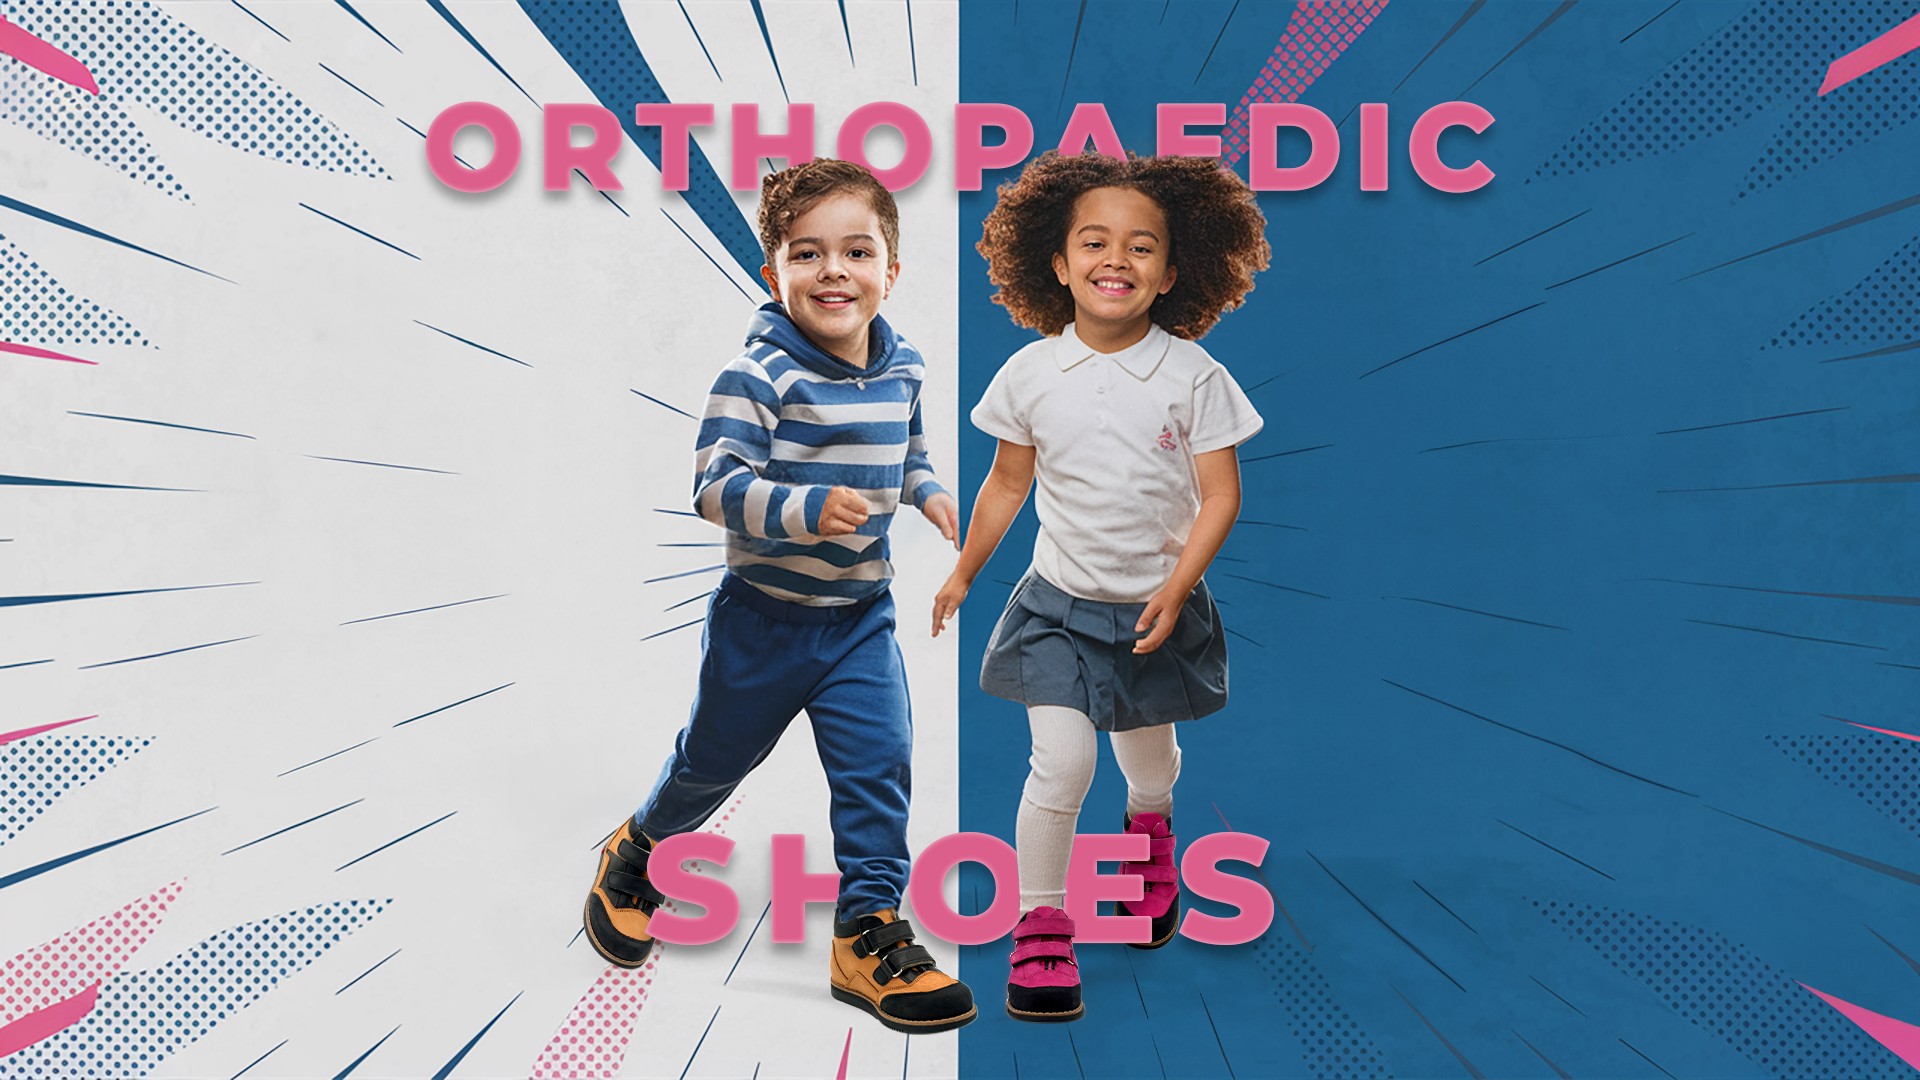 Head banner demonstrating orthopaedic shoes with arch and ankle support, featuring Thomas heels, worn by a boy and girl